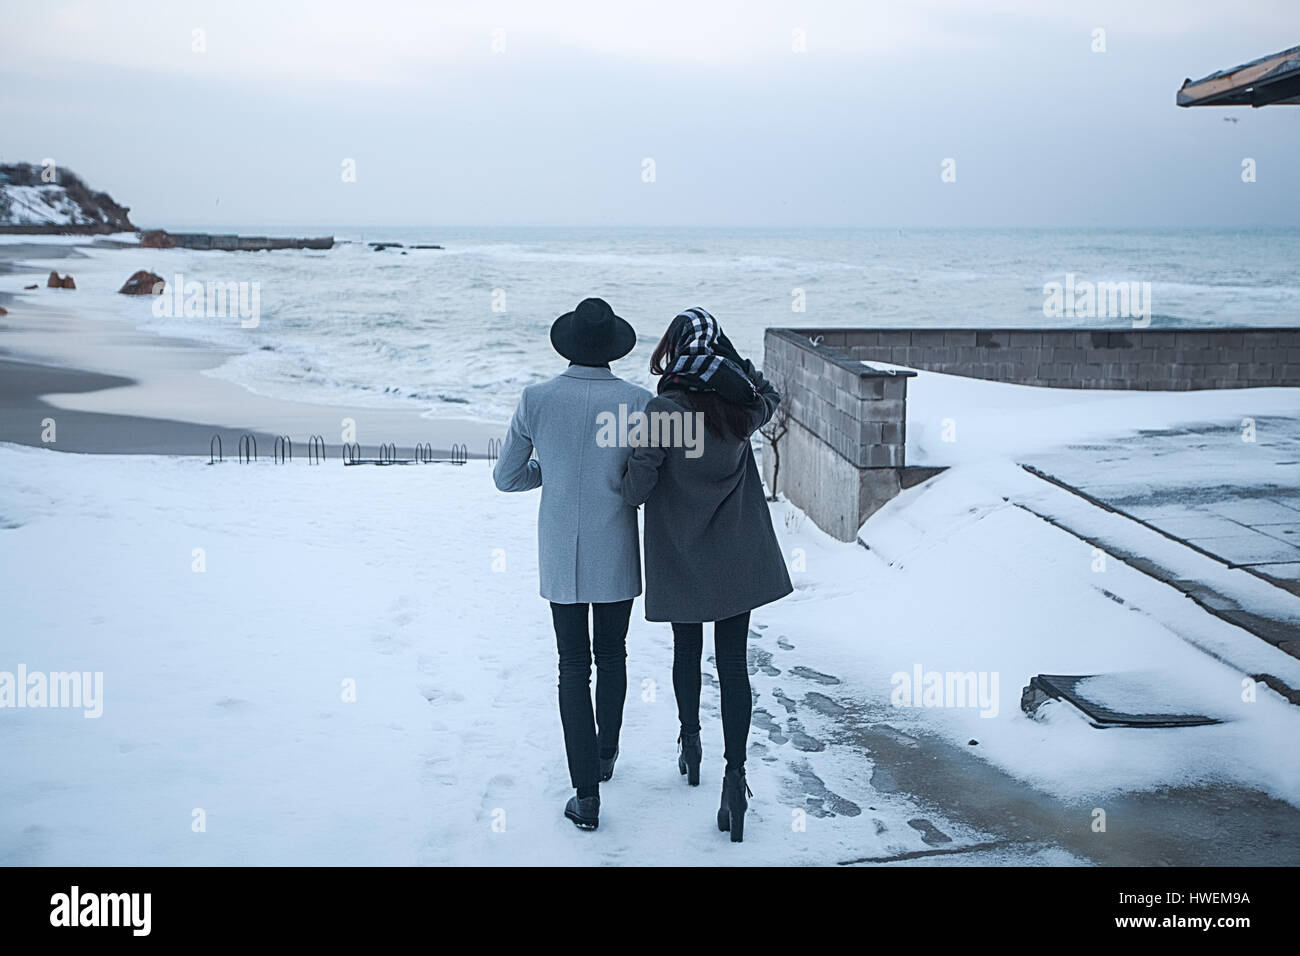 Couple on winter vacation, Odessa, Ukraine Banque D'Images